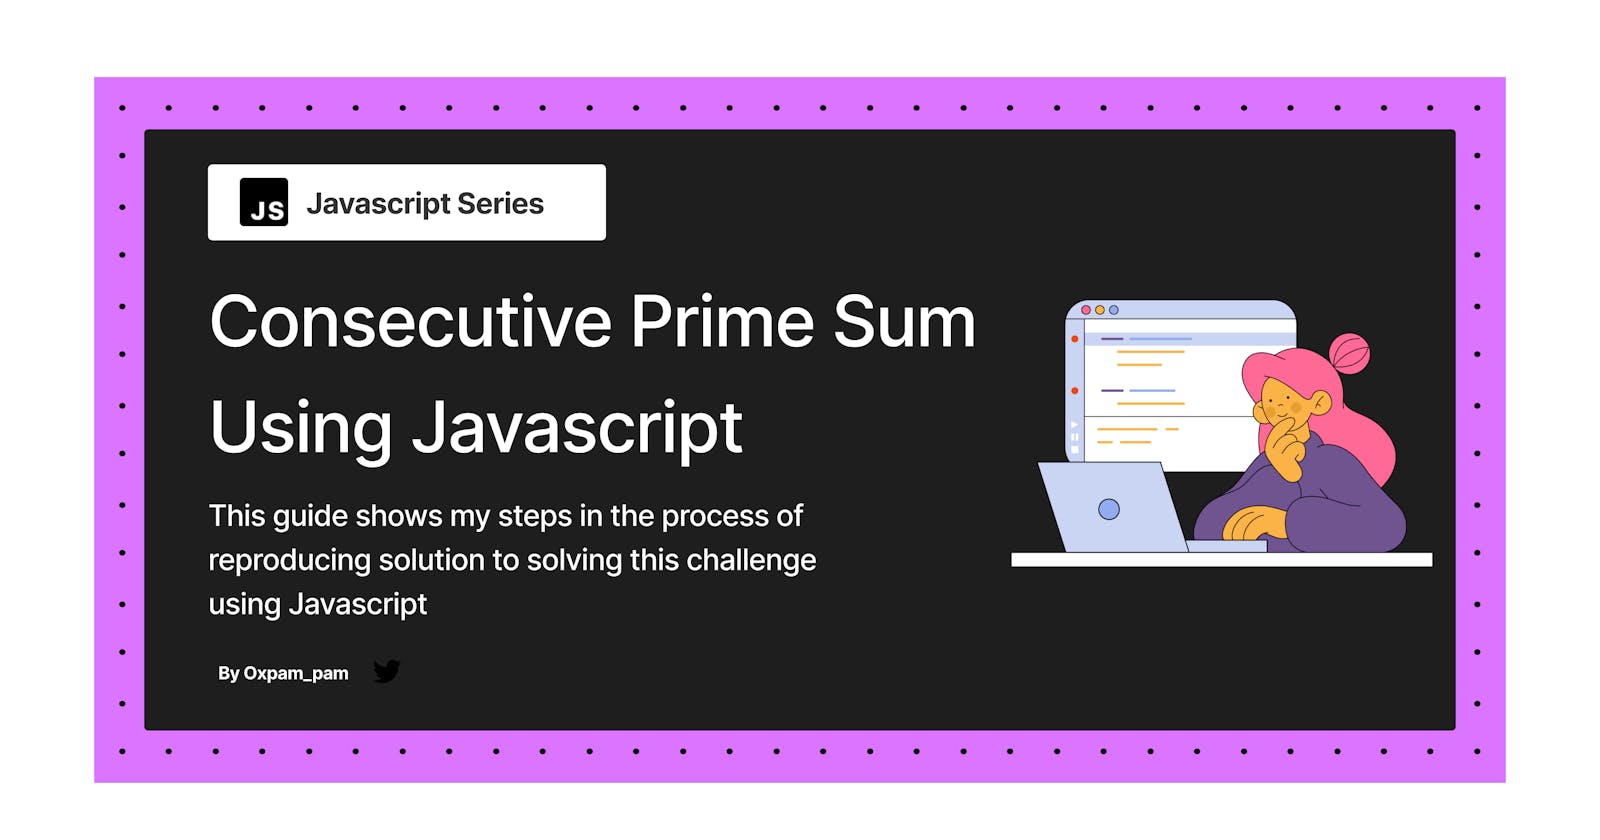 Technical Challenge: Solution to Consecutive Prime Sum using Javascript